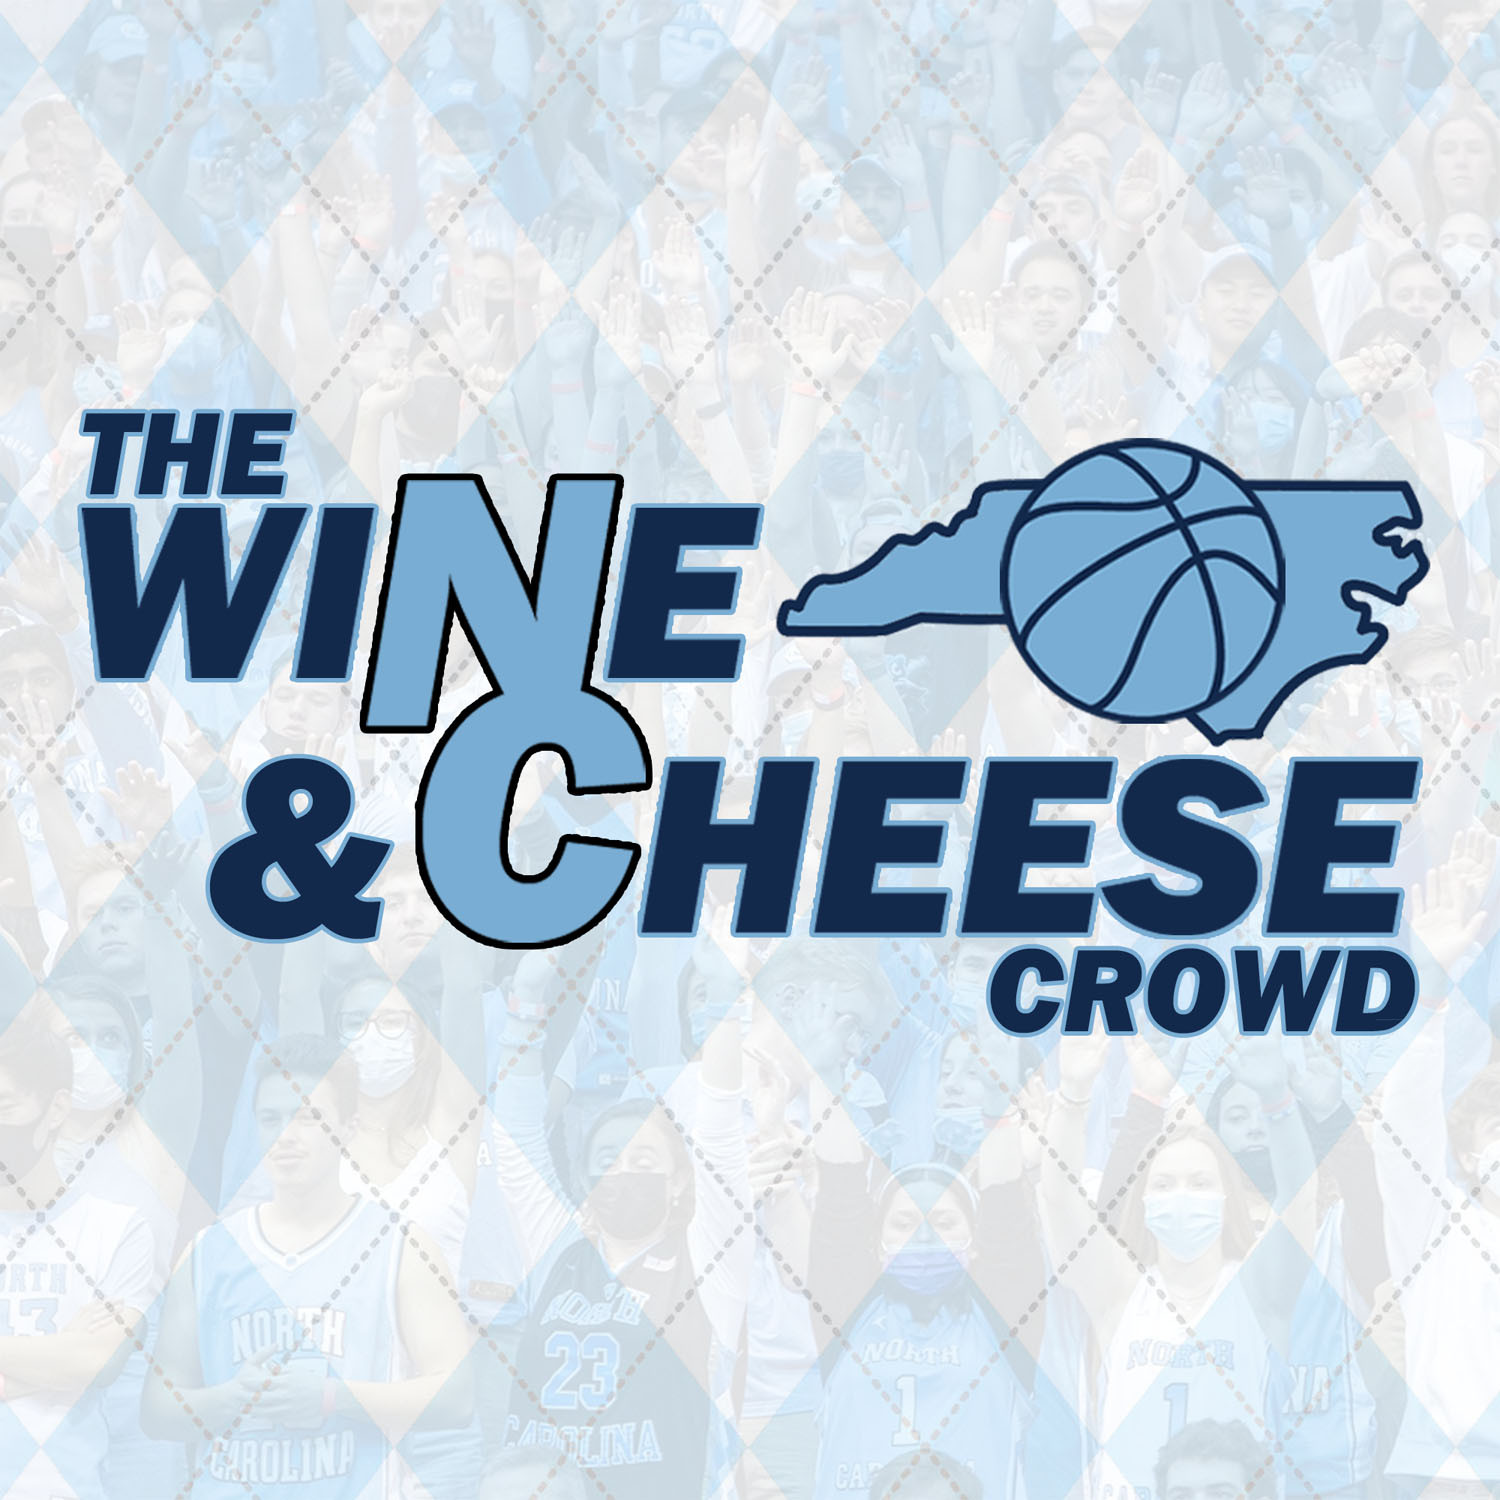 The Wine & Cheese Crowd